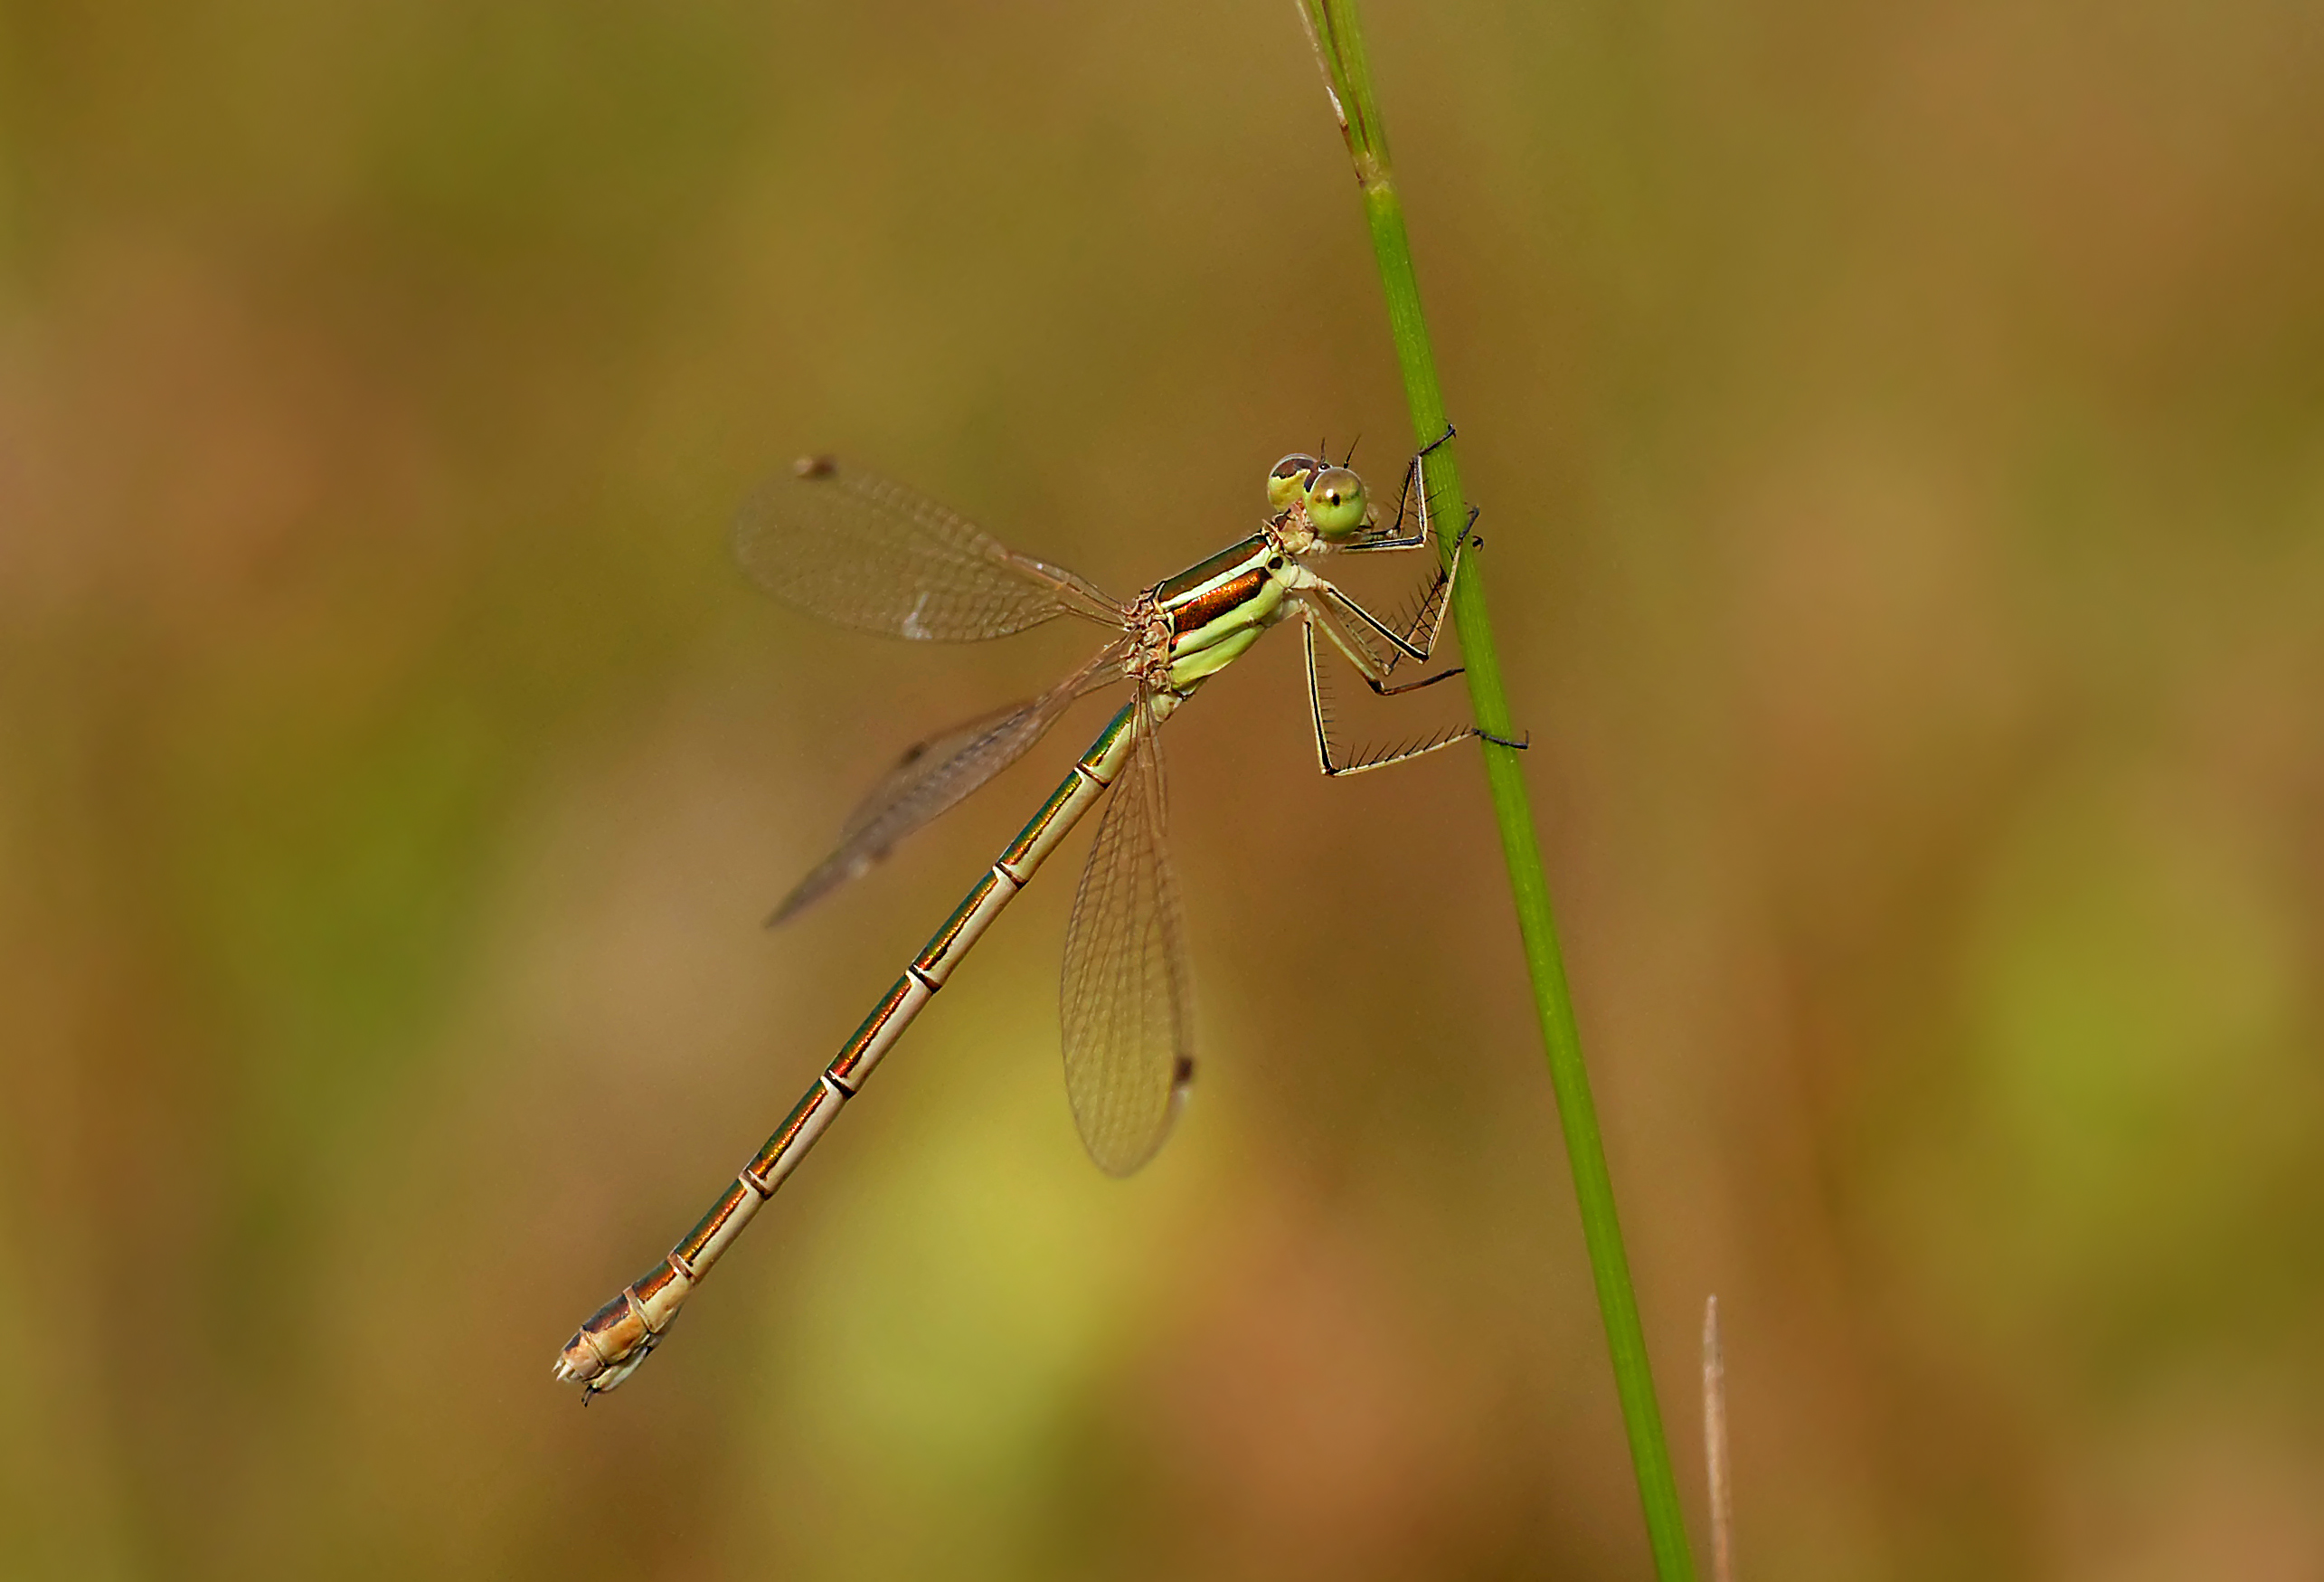 Southern emerald damselfly (Lestes barbarus), Pen-er-Malo, Guidel, Brittany, France (19219706353)